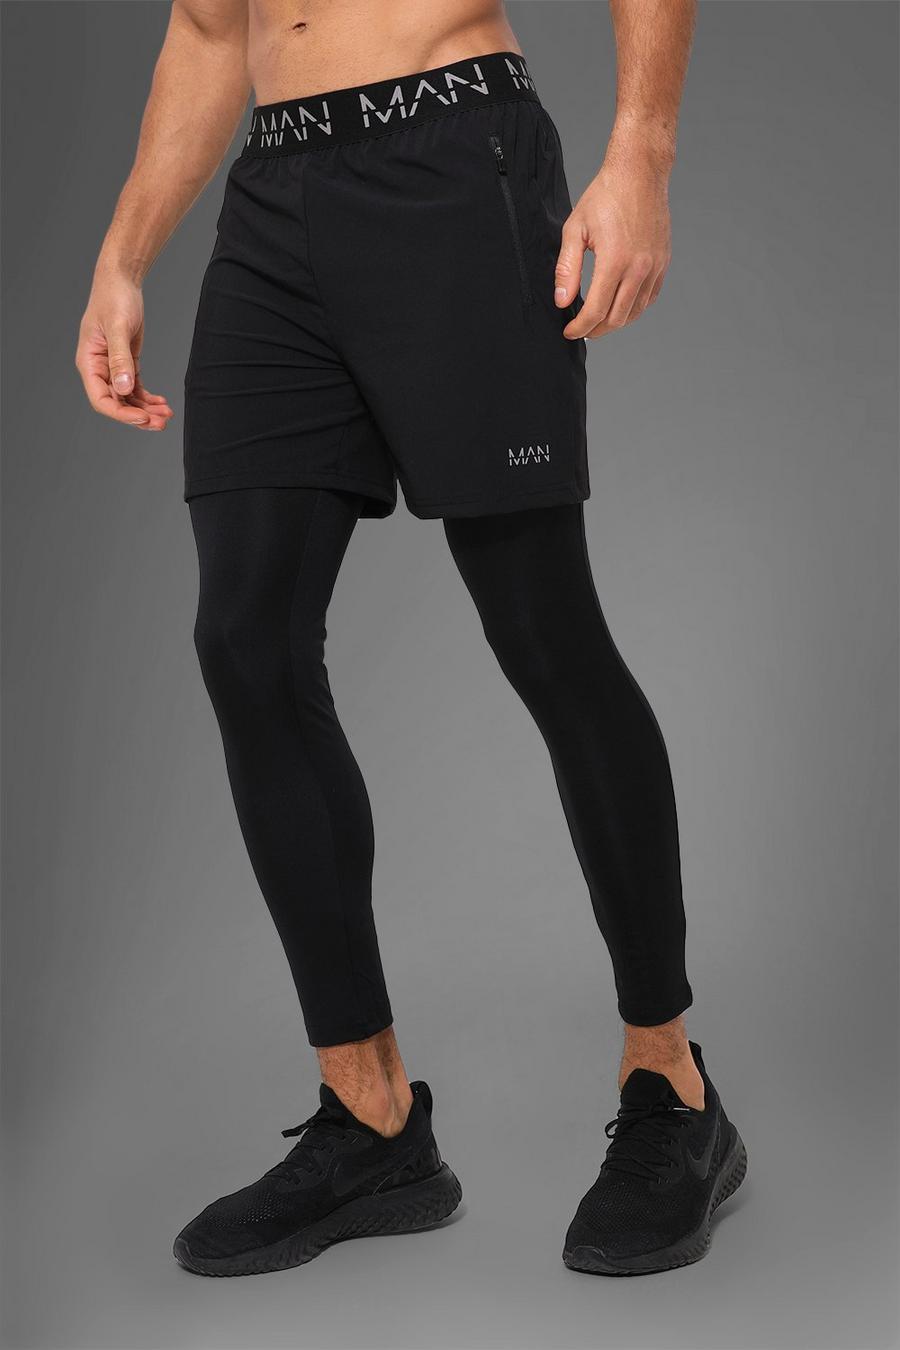 Men's Shorts with Leggings 2-in-1 GRAFEN E-store  - Polish  manufacturer of sportswear for fitness, Crossfit, gym, running. Quick  delivery and easy return and exchange